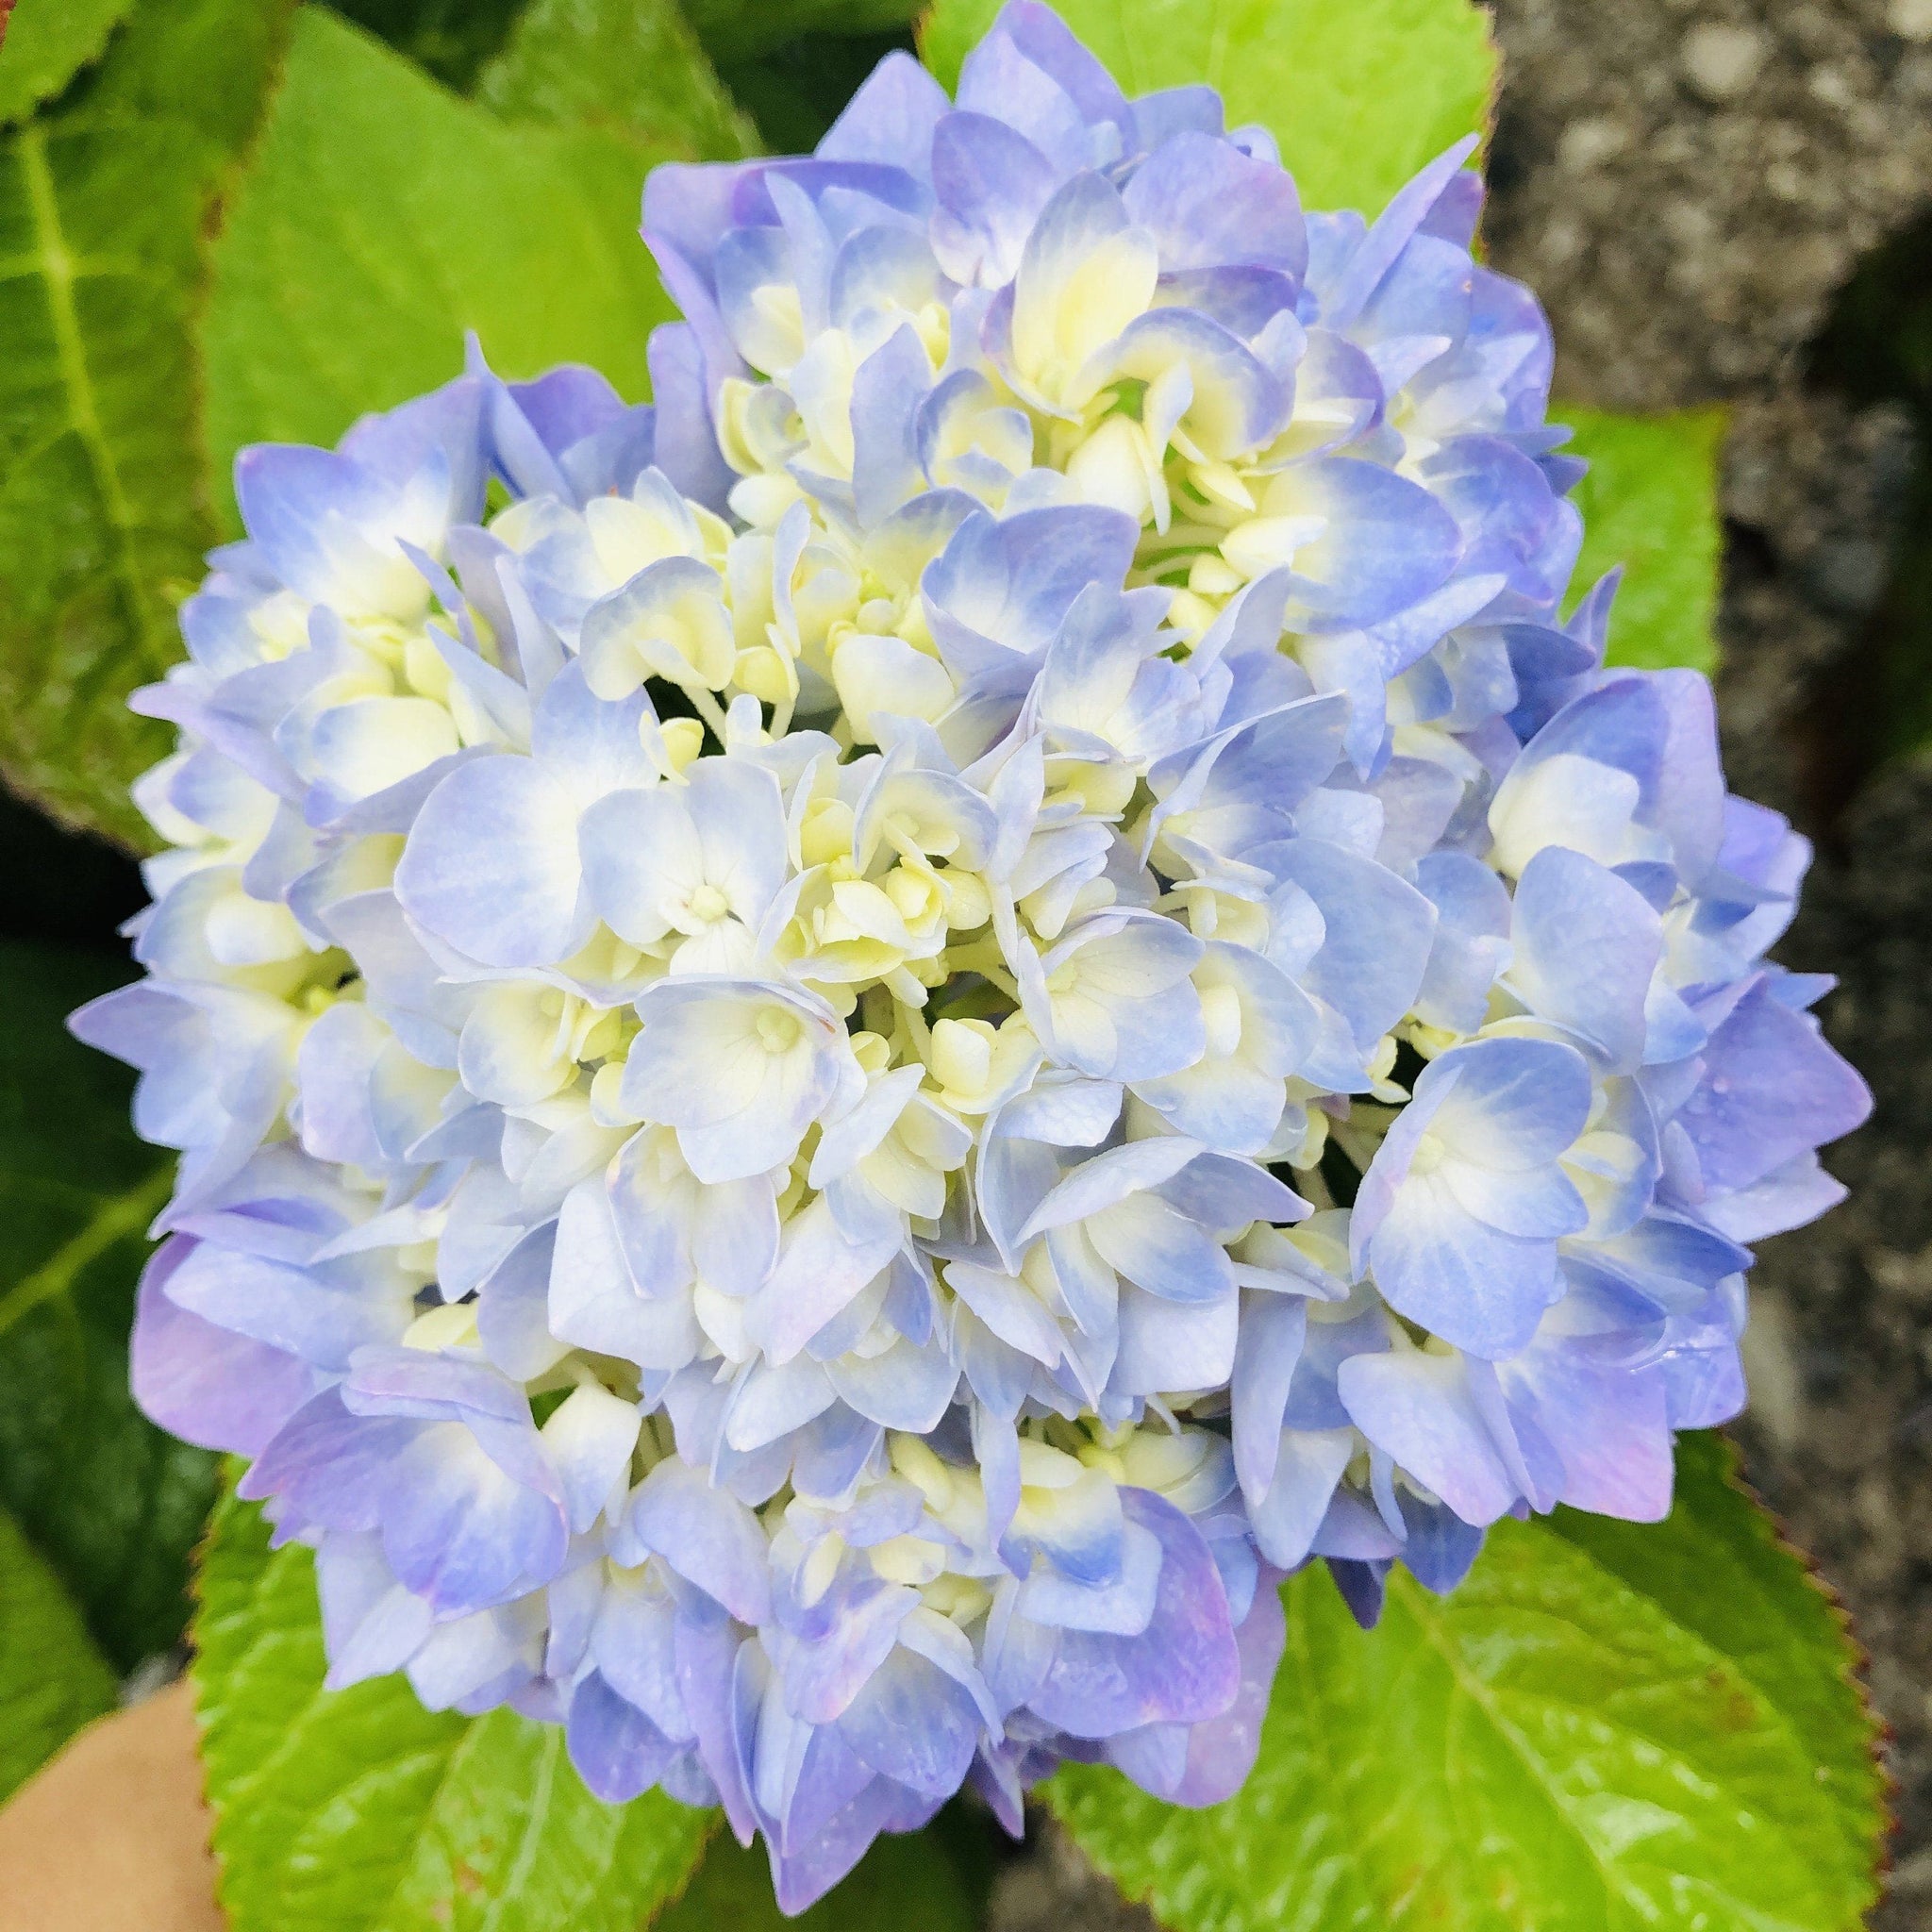 How to Grow and Care for Endless Summer Hydrangeas